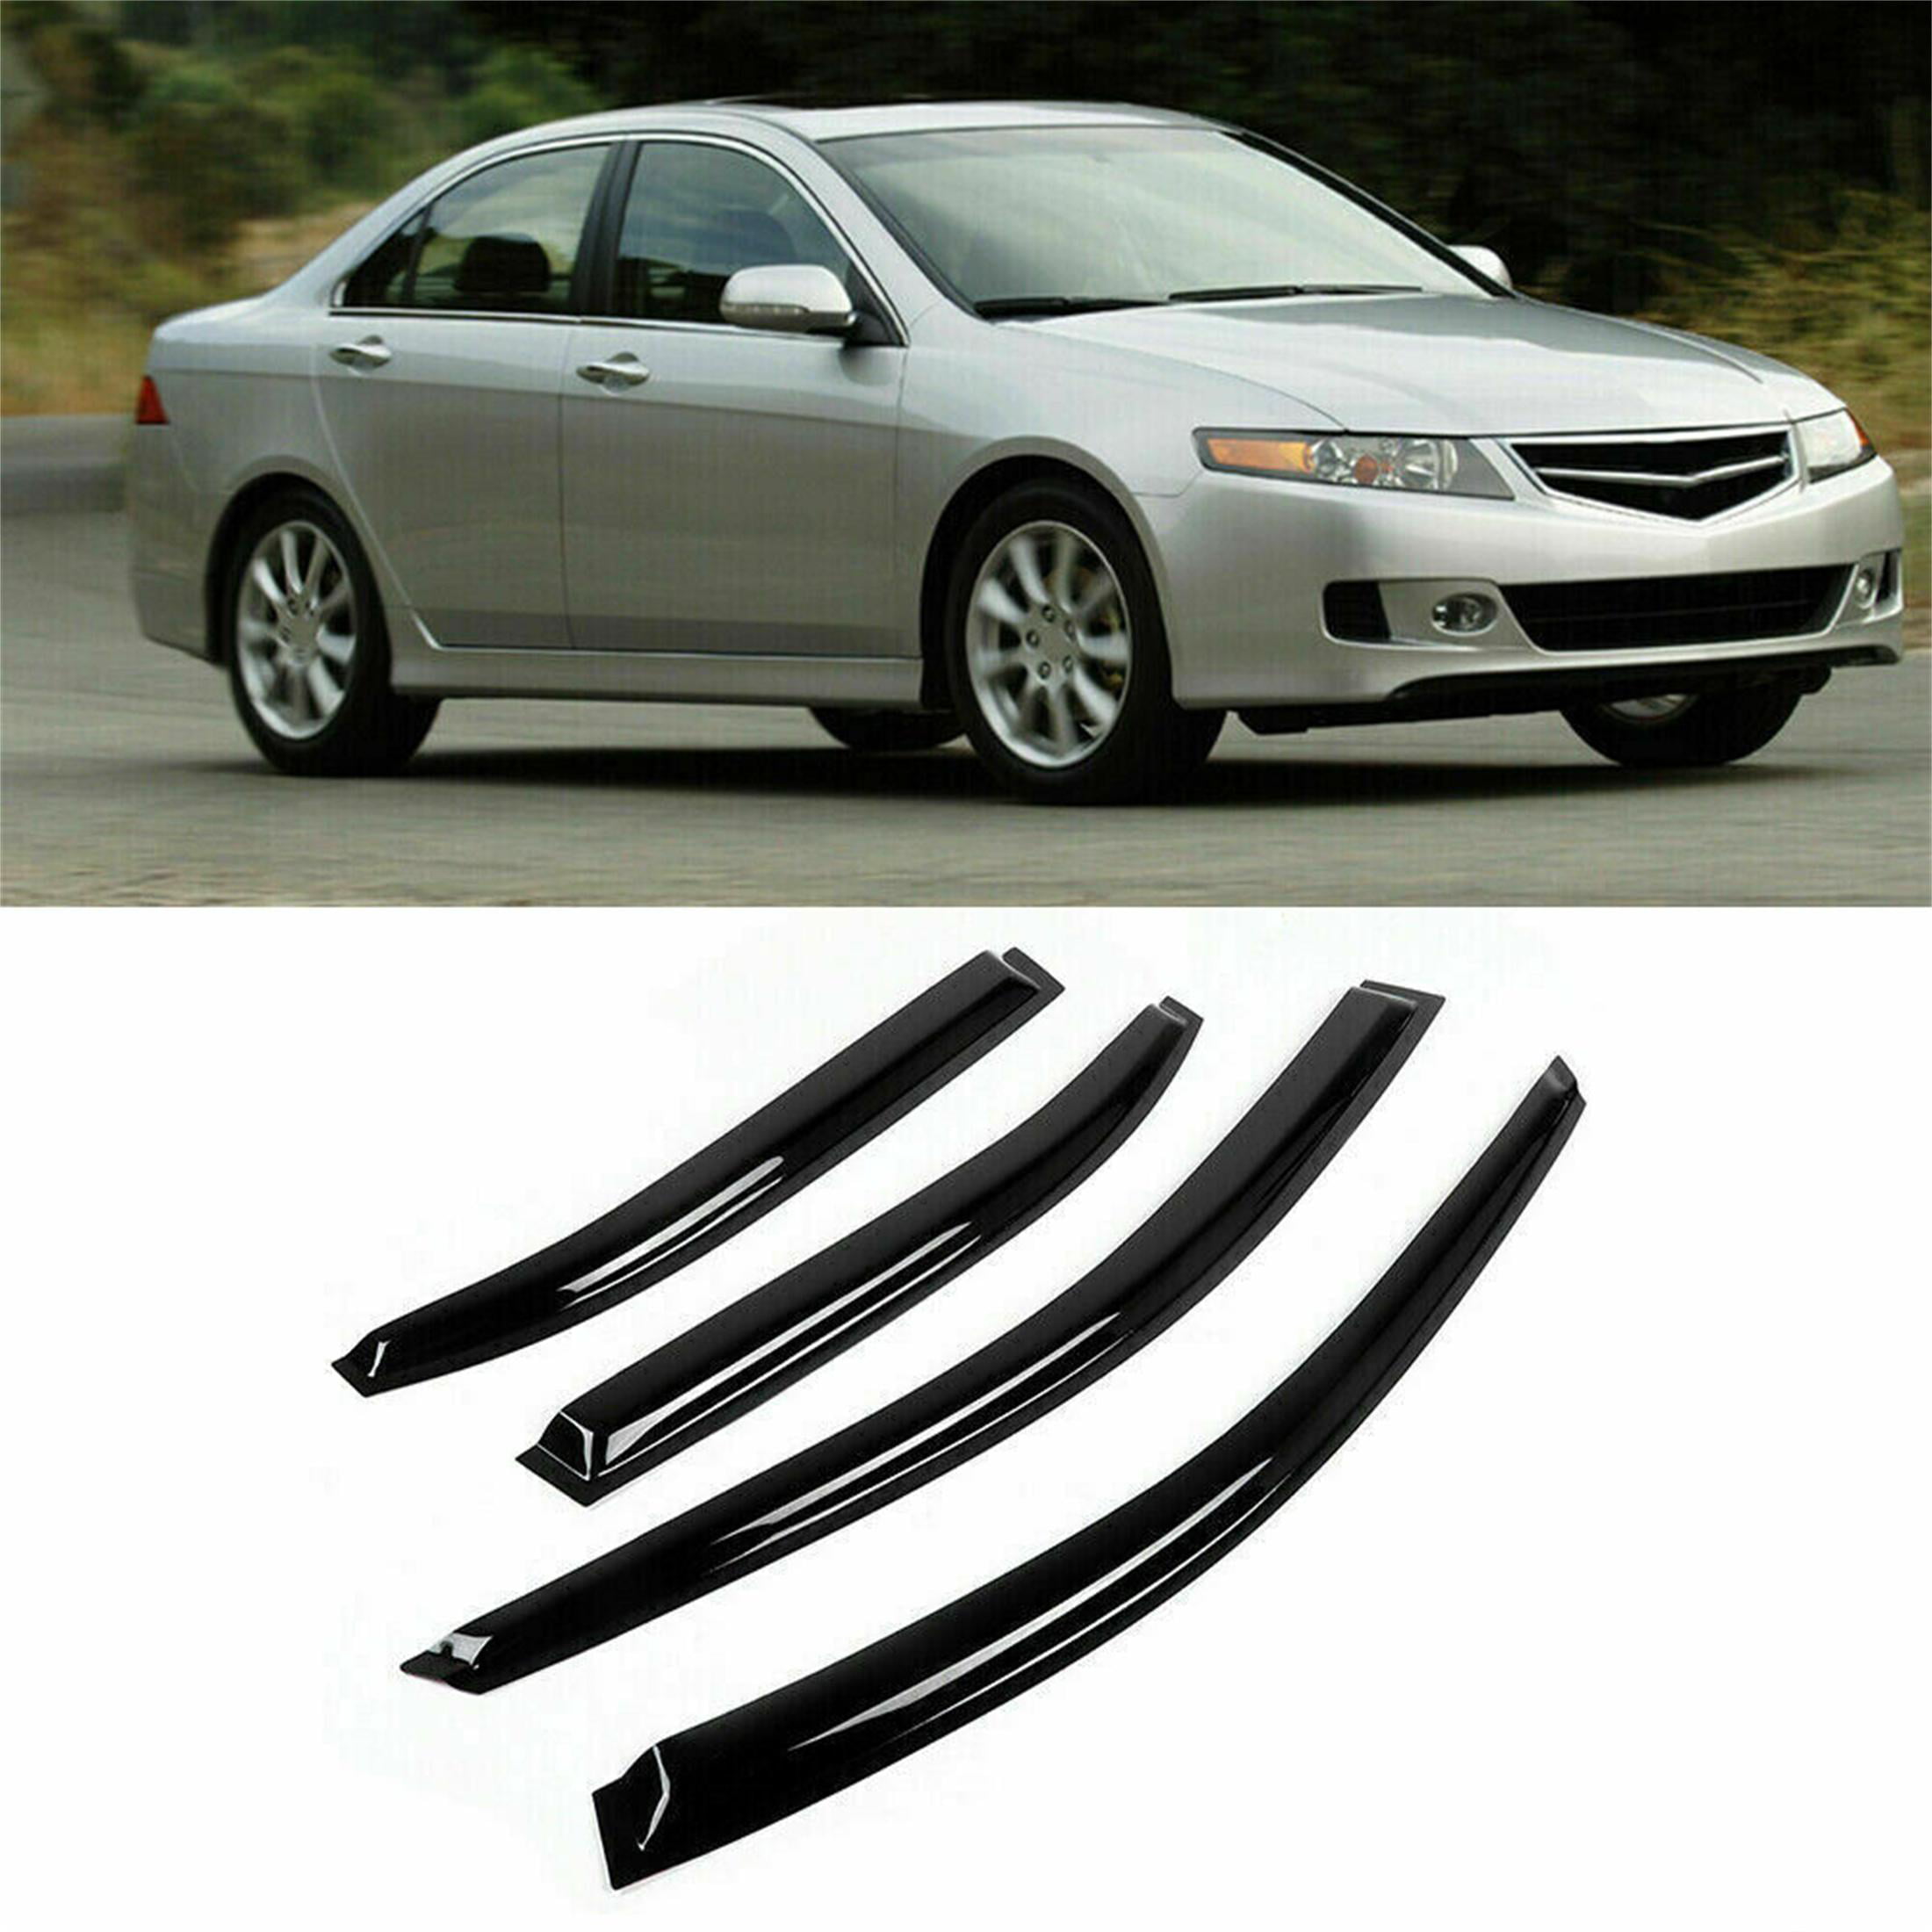 For Acura TSX 04-08 Deflector Window Visors Guard Vent Weather Shield